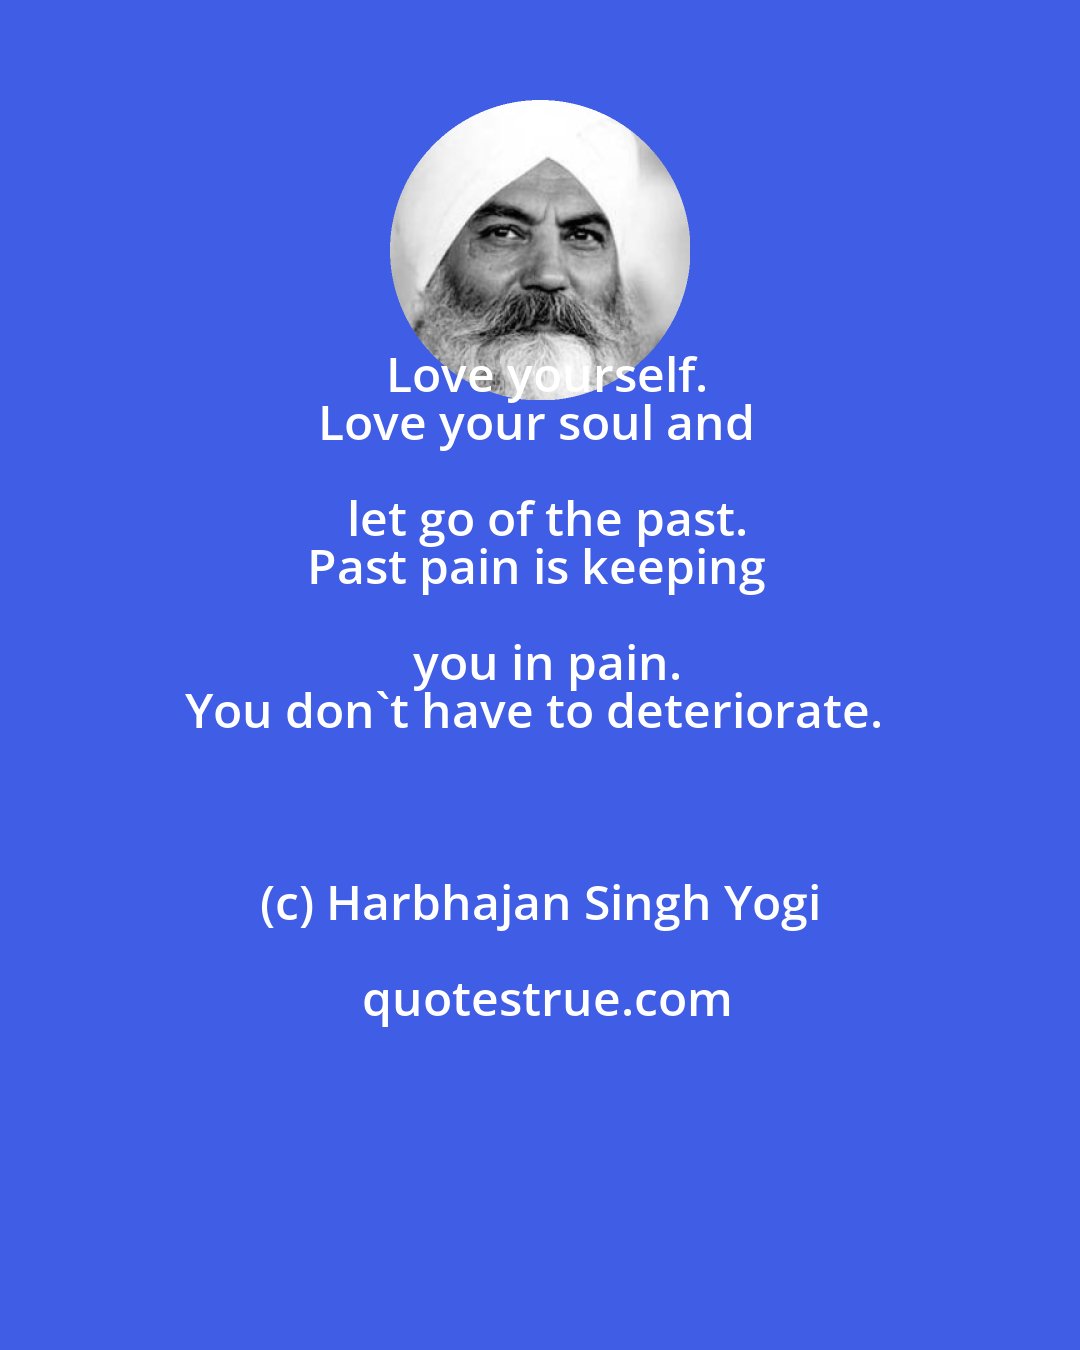 Harbhajan Singh Yogi: Love yourself.
Love your soul and let go of the past.
Past pain is keeping you in pain.
You don't have to deteriorate.